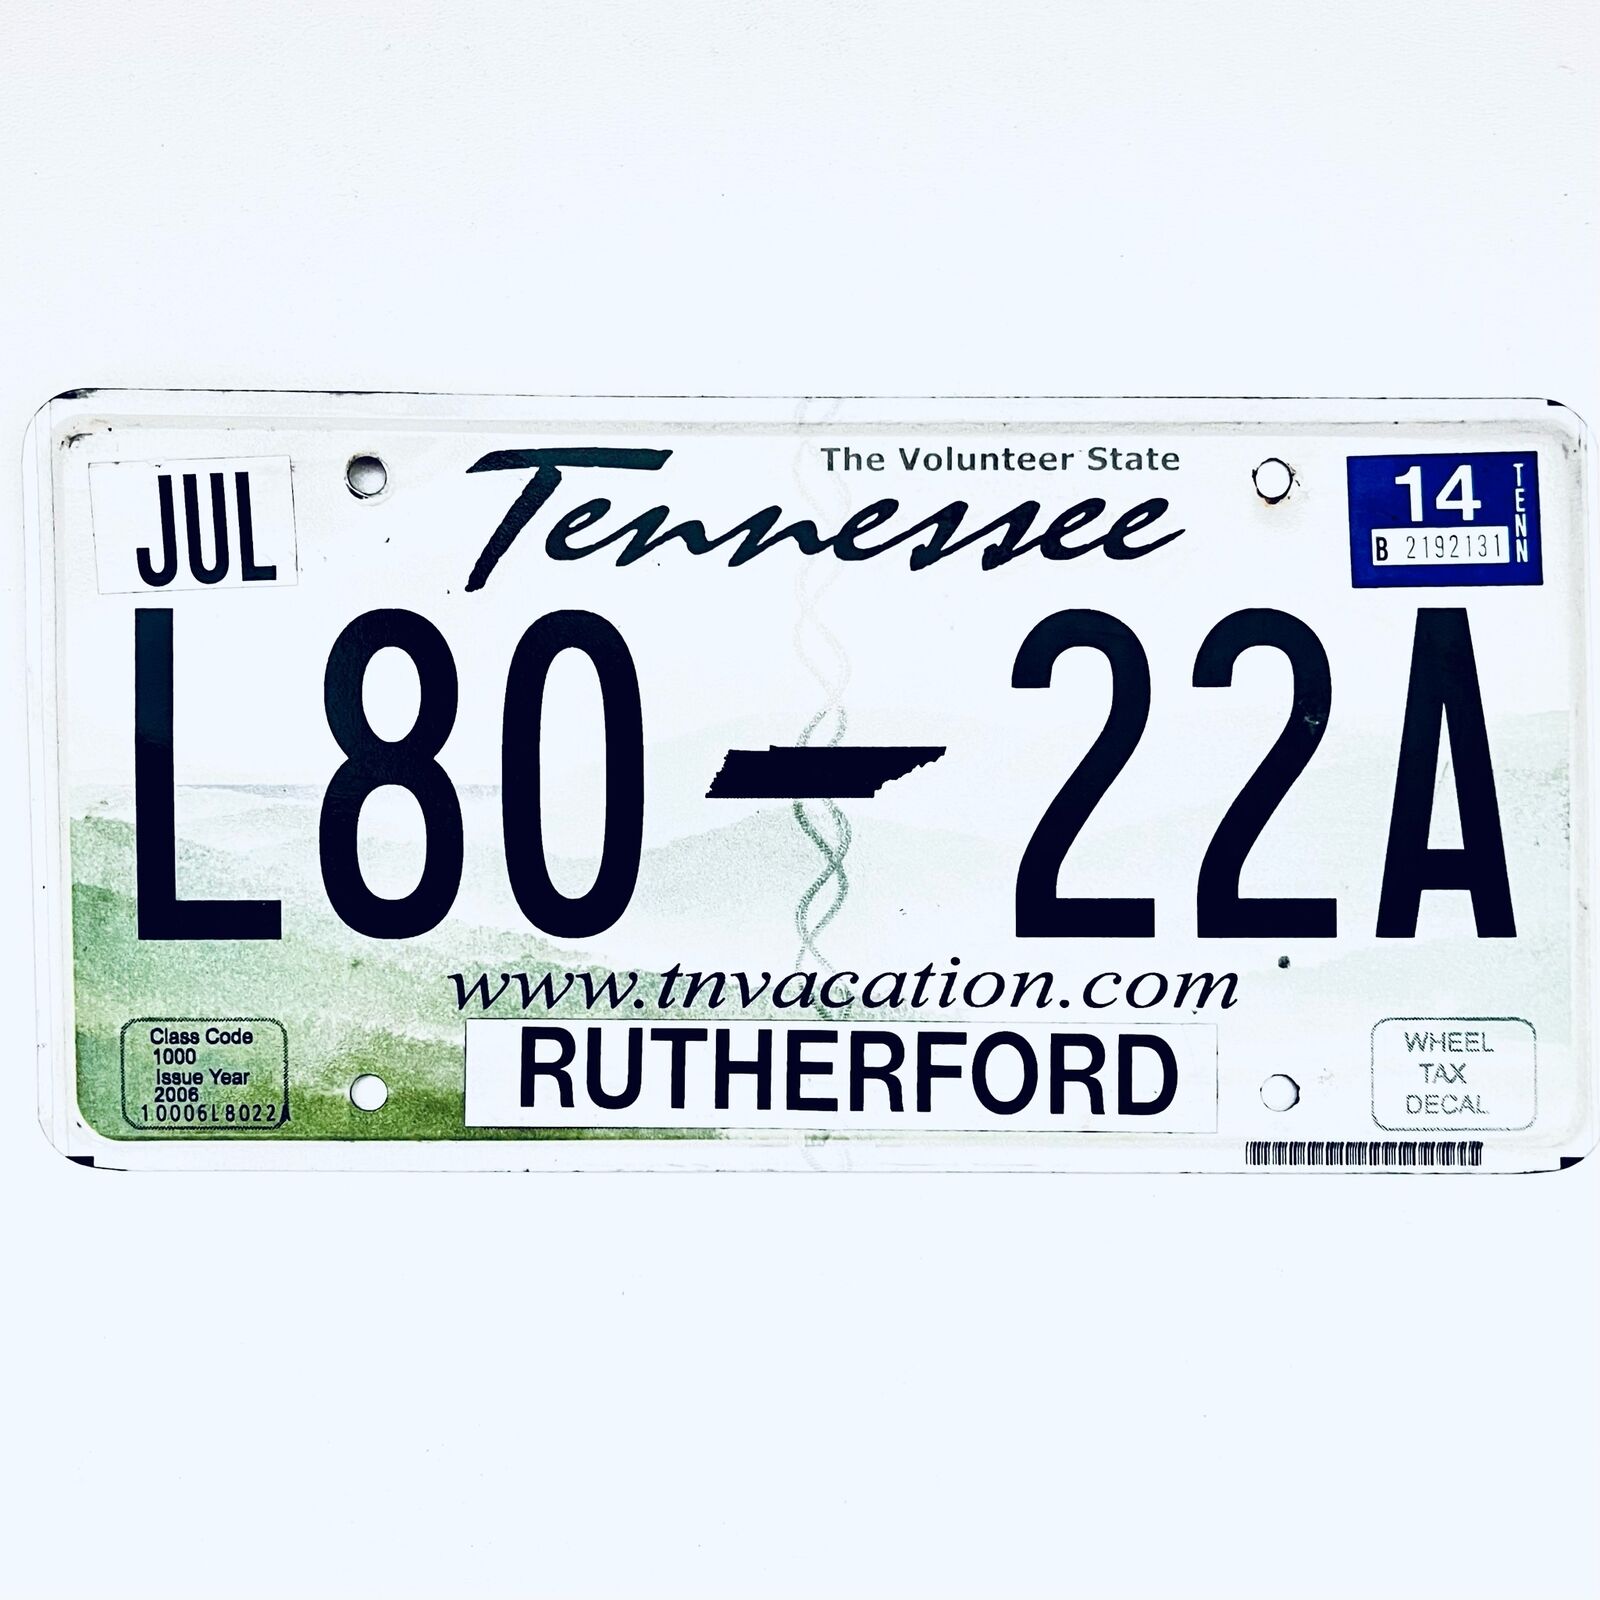 2014 United States Tennessee Rutherford County Passenger License Plate L80 22A